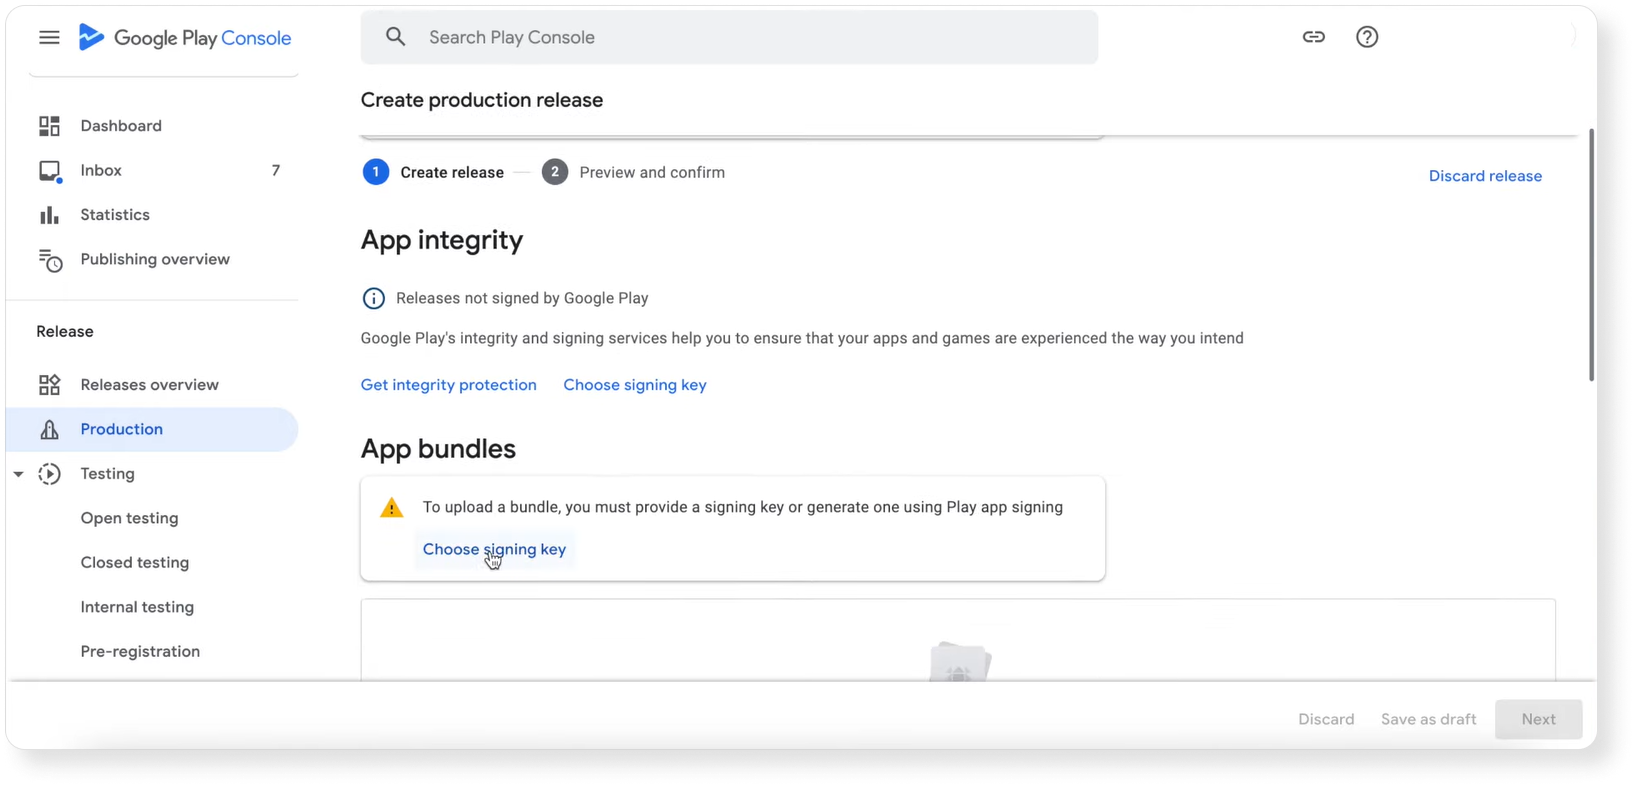 Choosing a signing key on Google Play Console